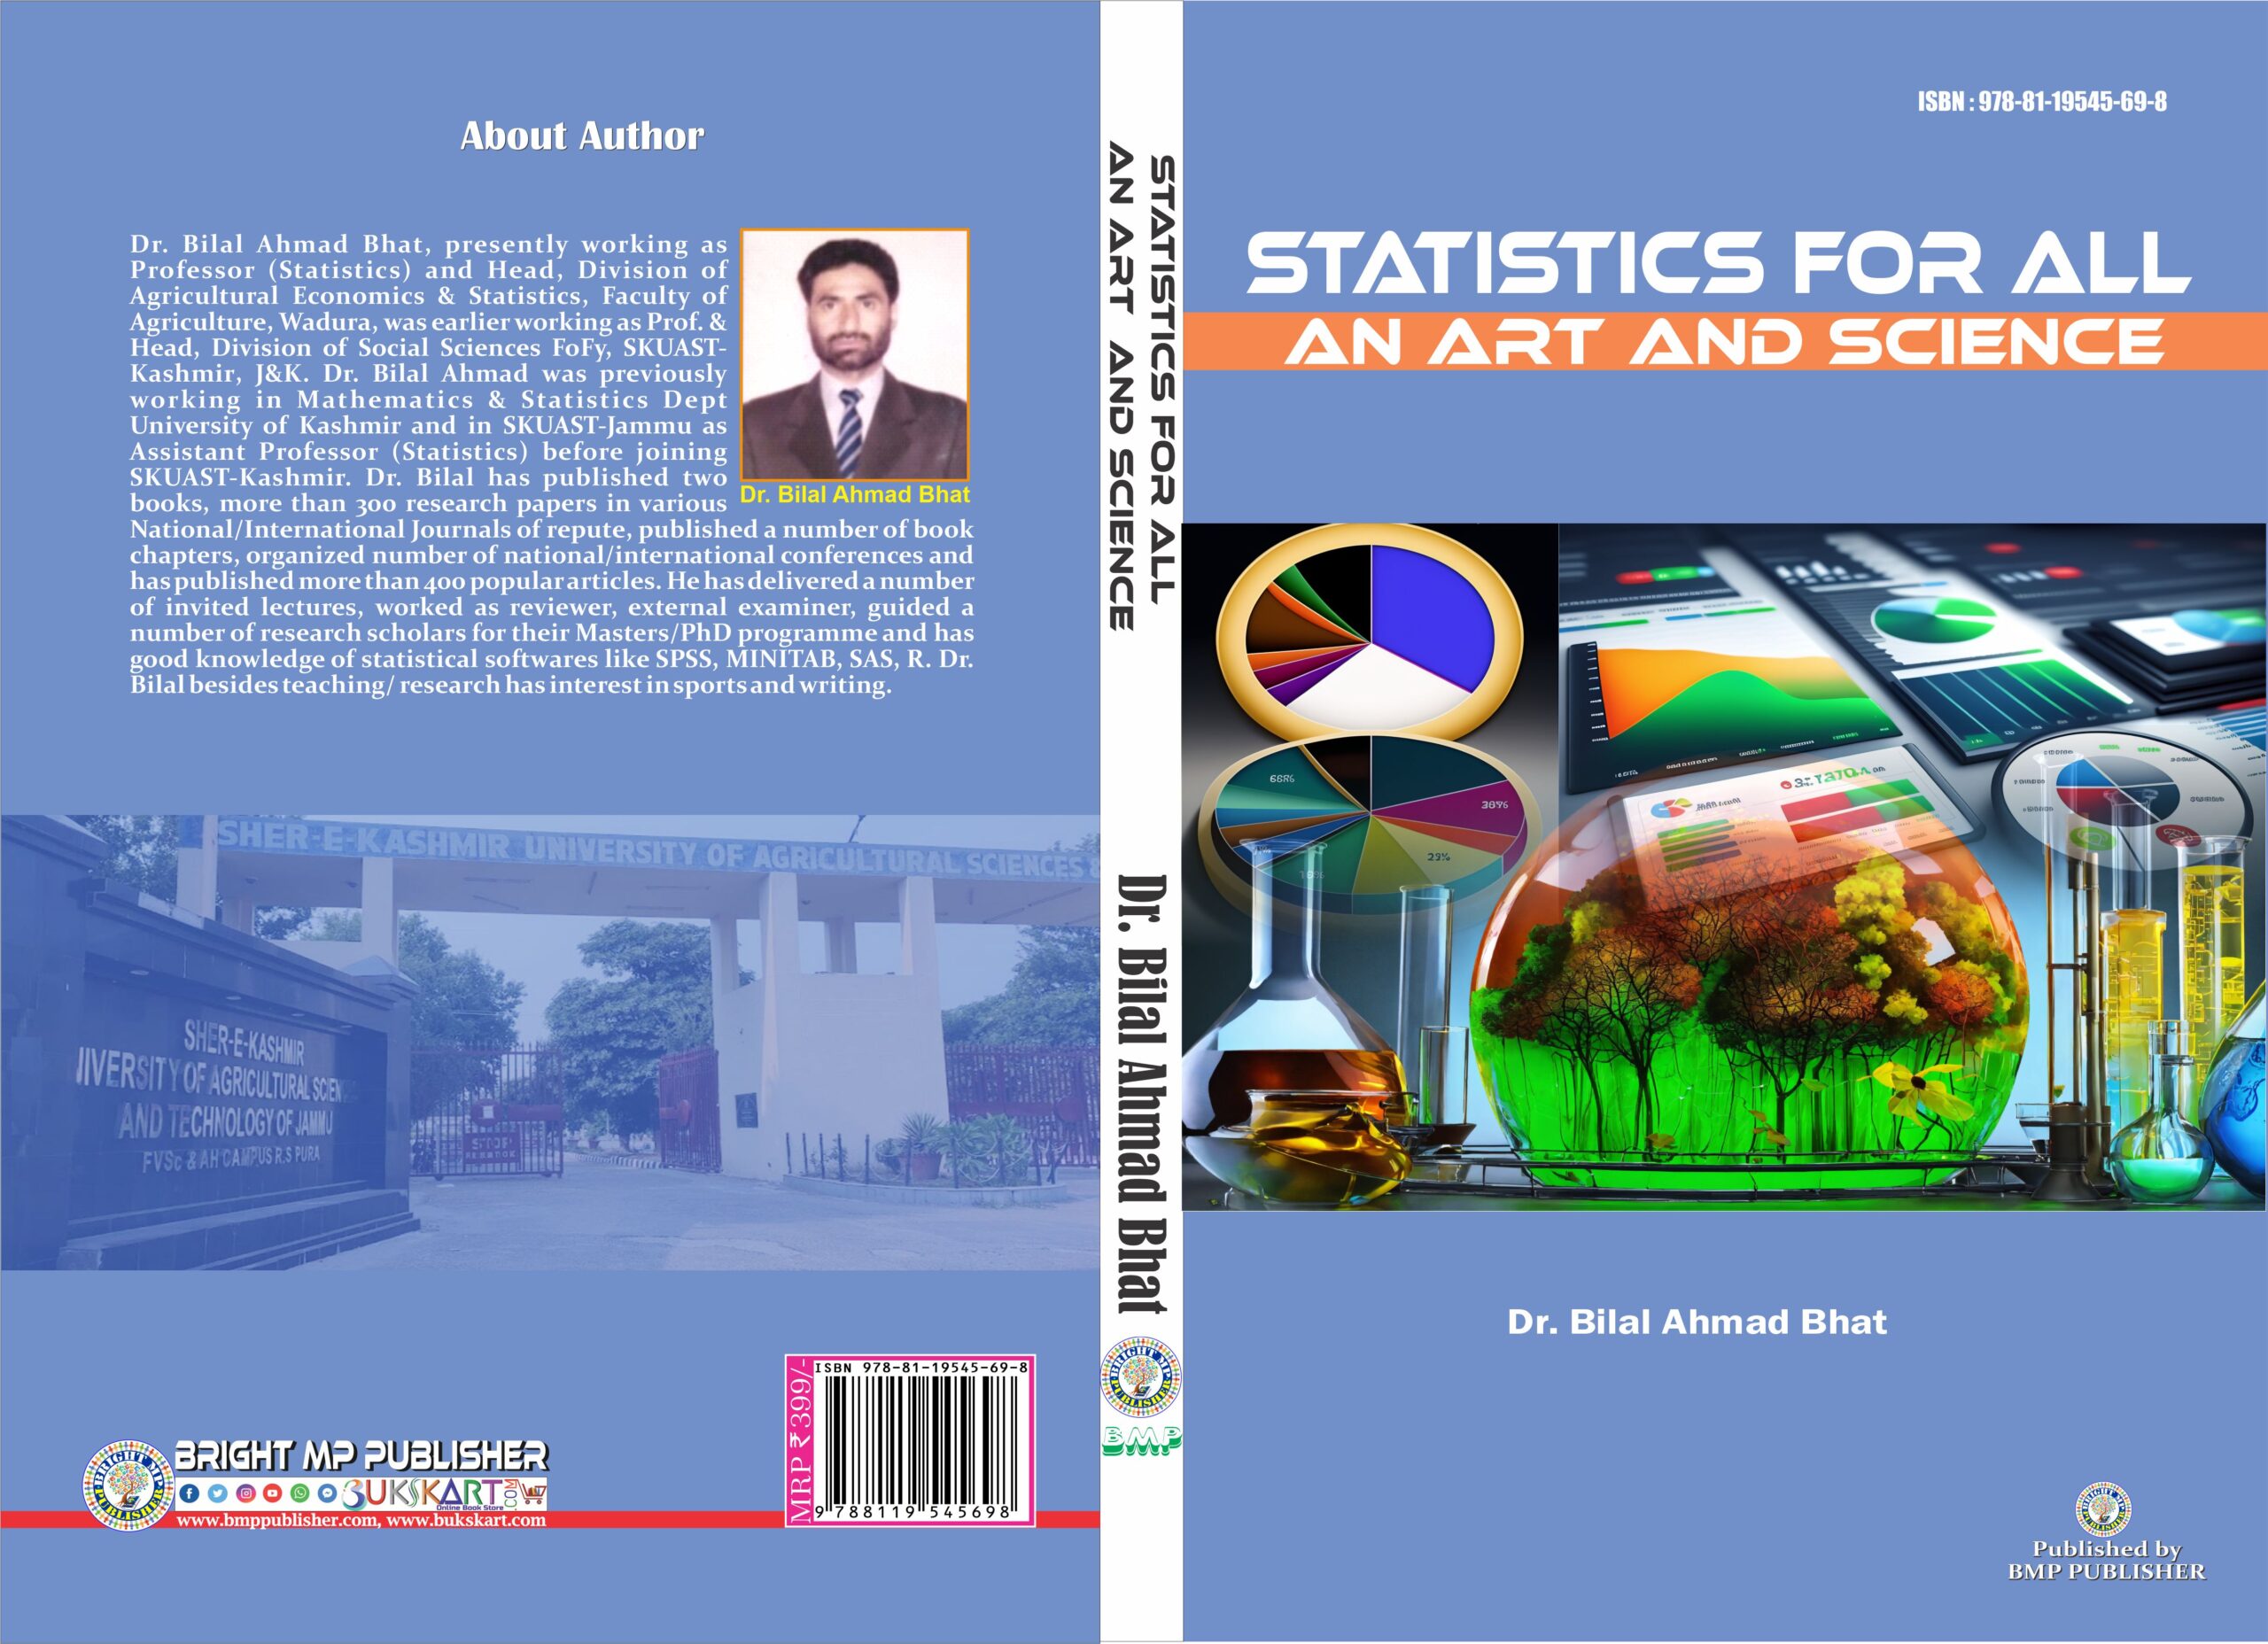 COVER PAGE OF STATISTICS FOR ALL